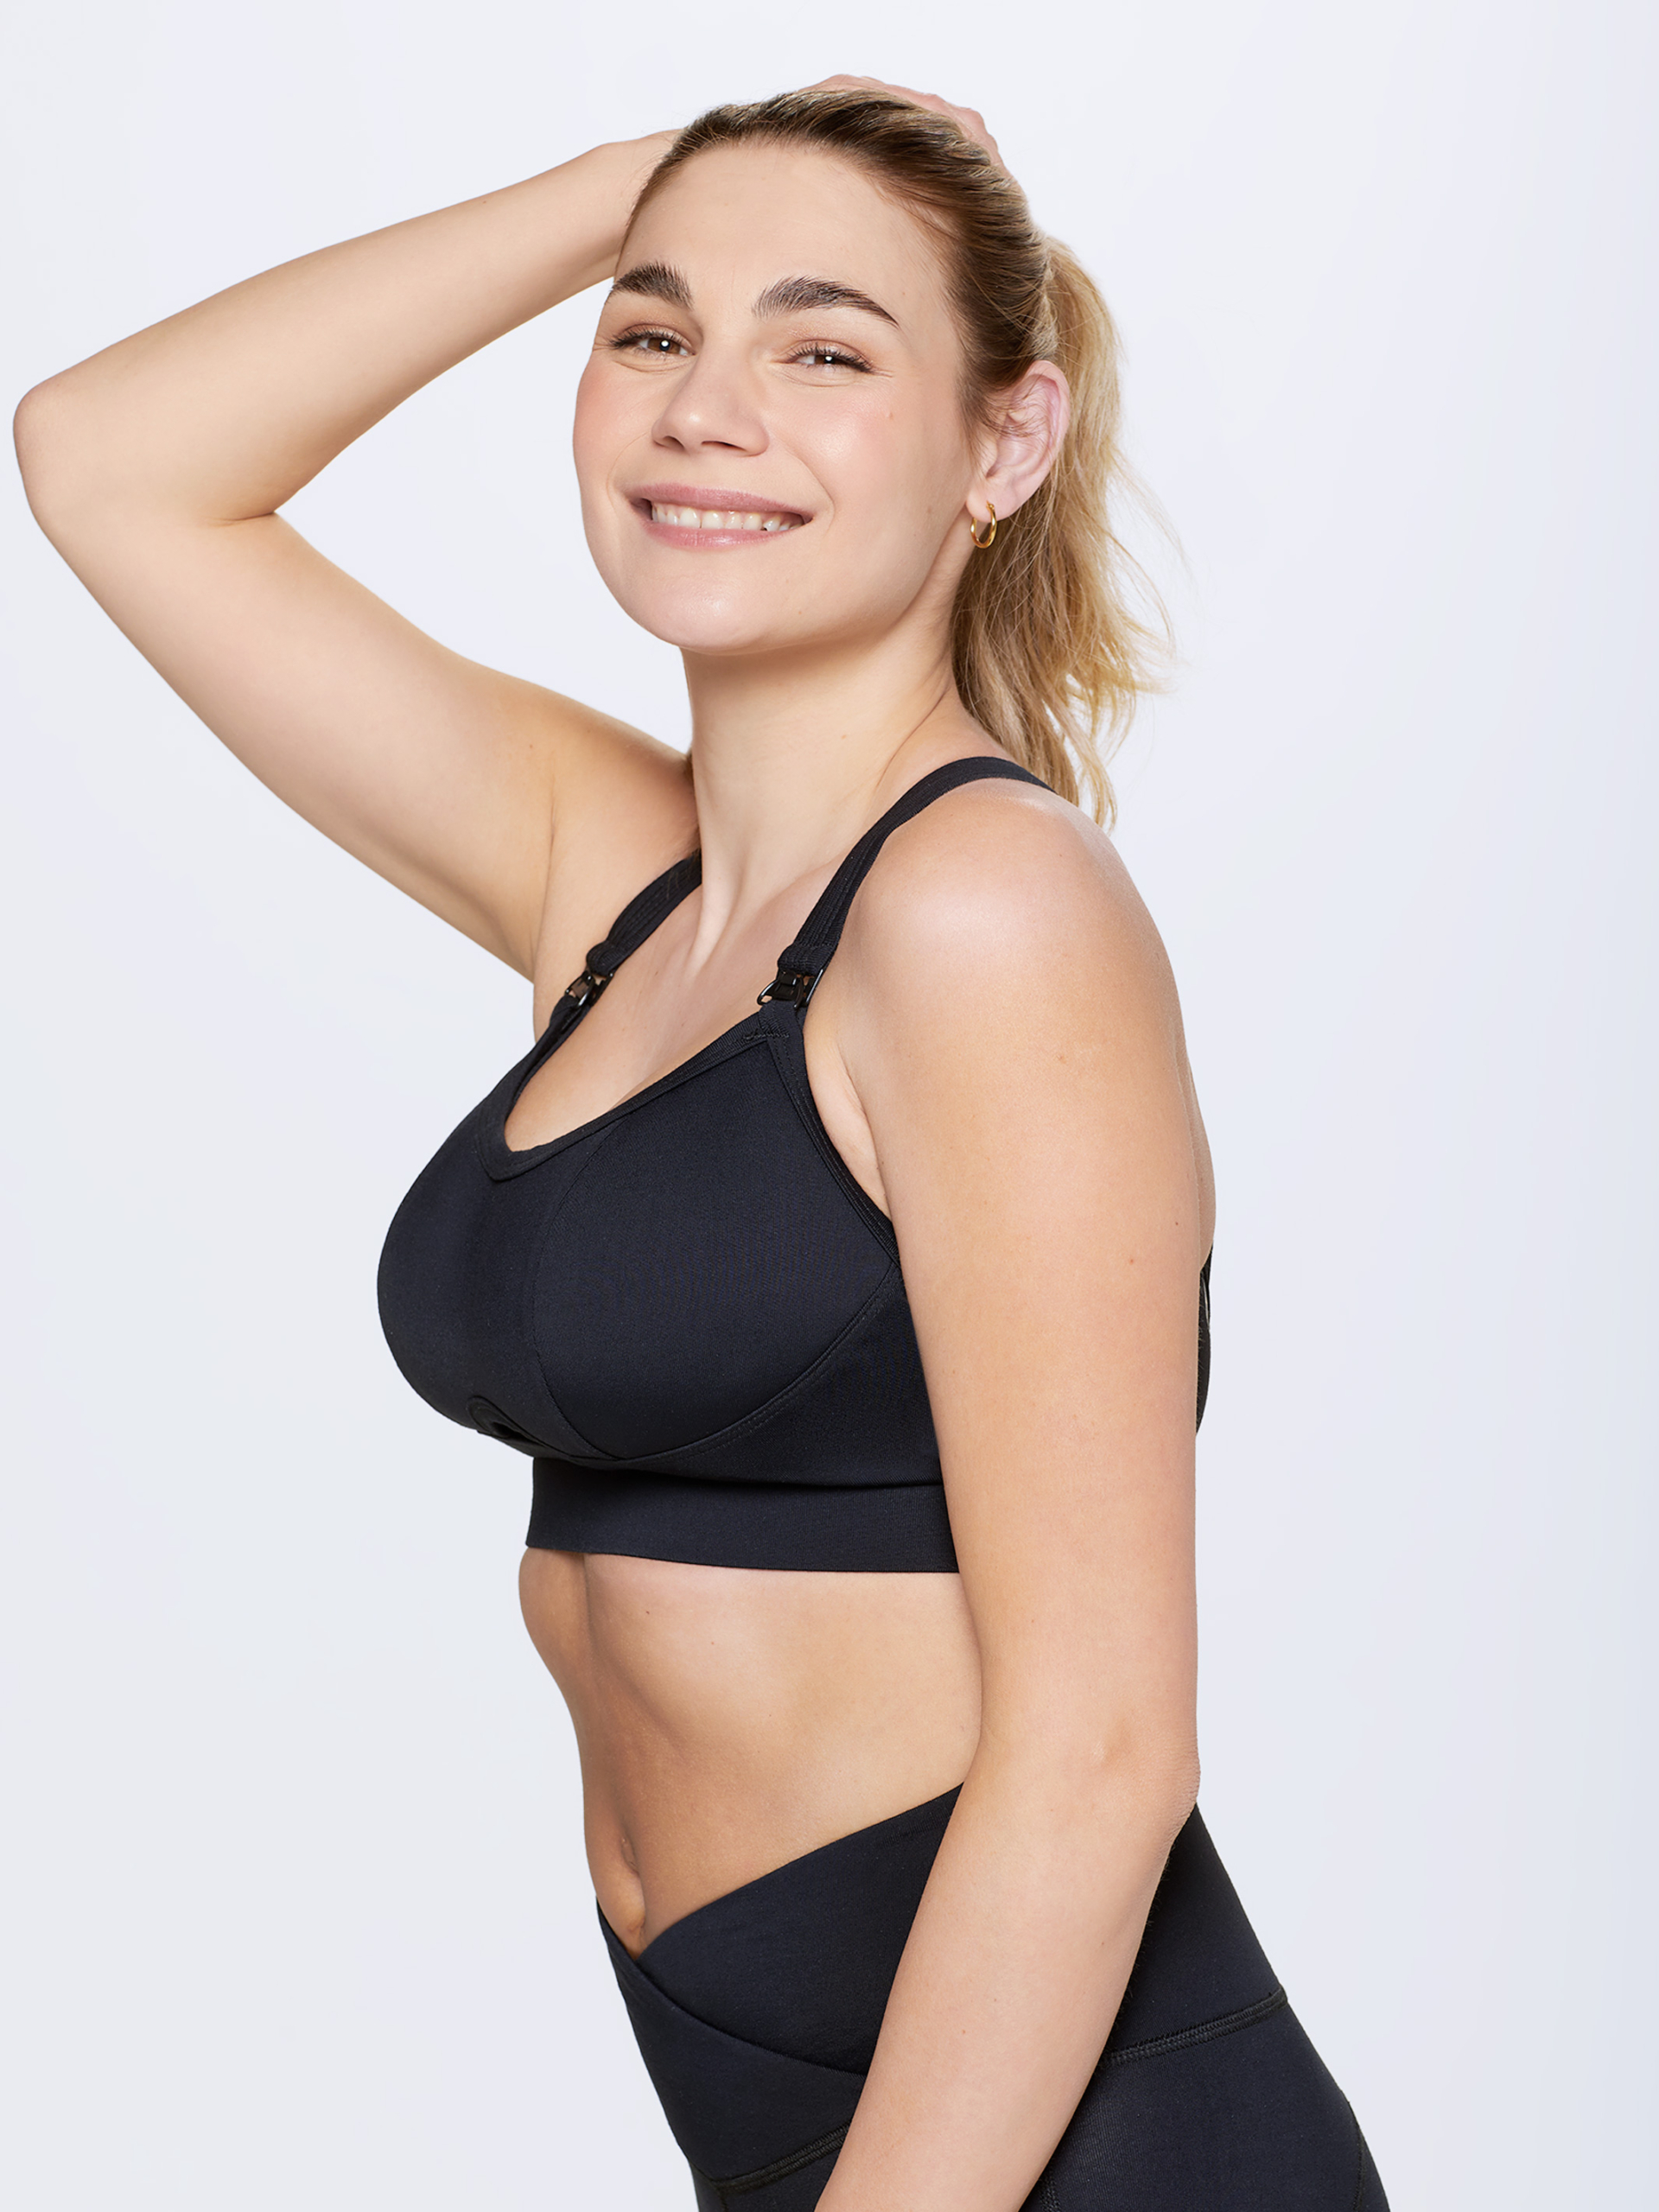 The Peek-a-Boo Bra Trend Is Here, and It's Got Staying Power